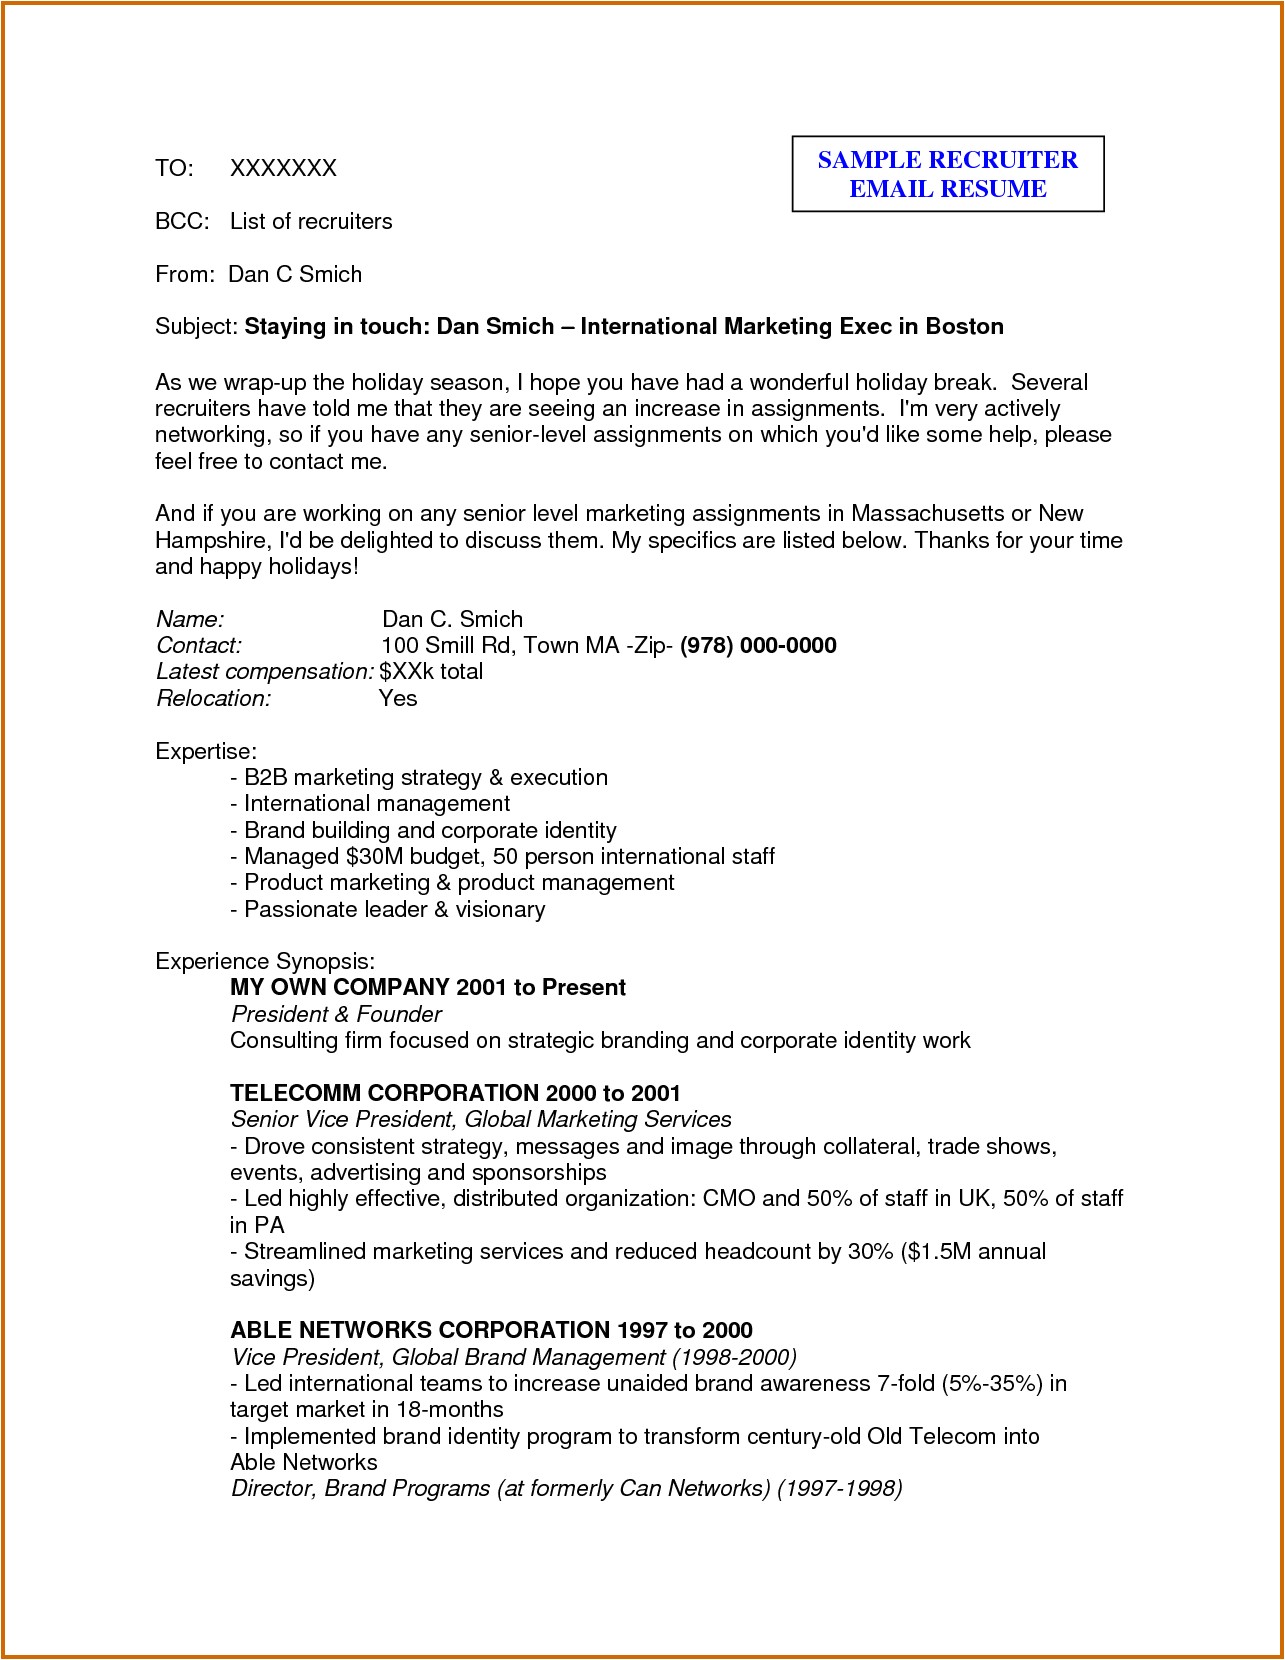 Sample Email to Send Resume to Recruiter 5 How to Write A Mail to Recruiter Sample Lease Template